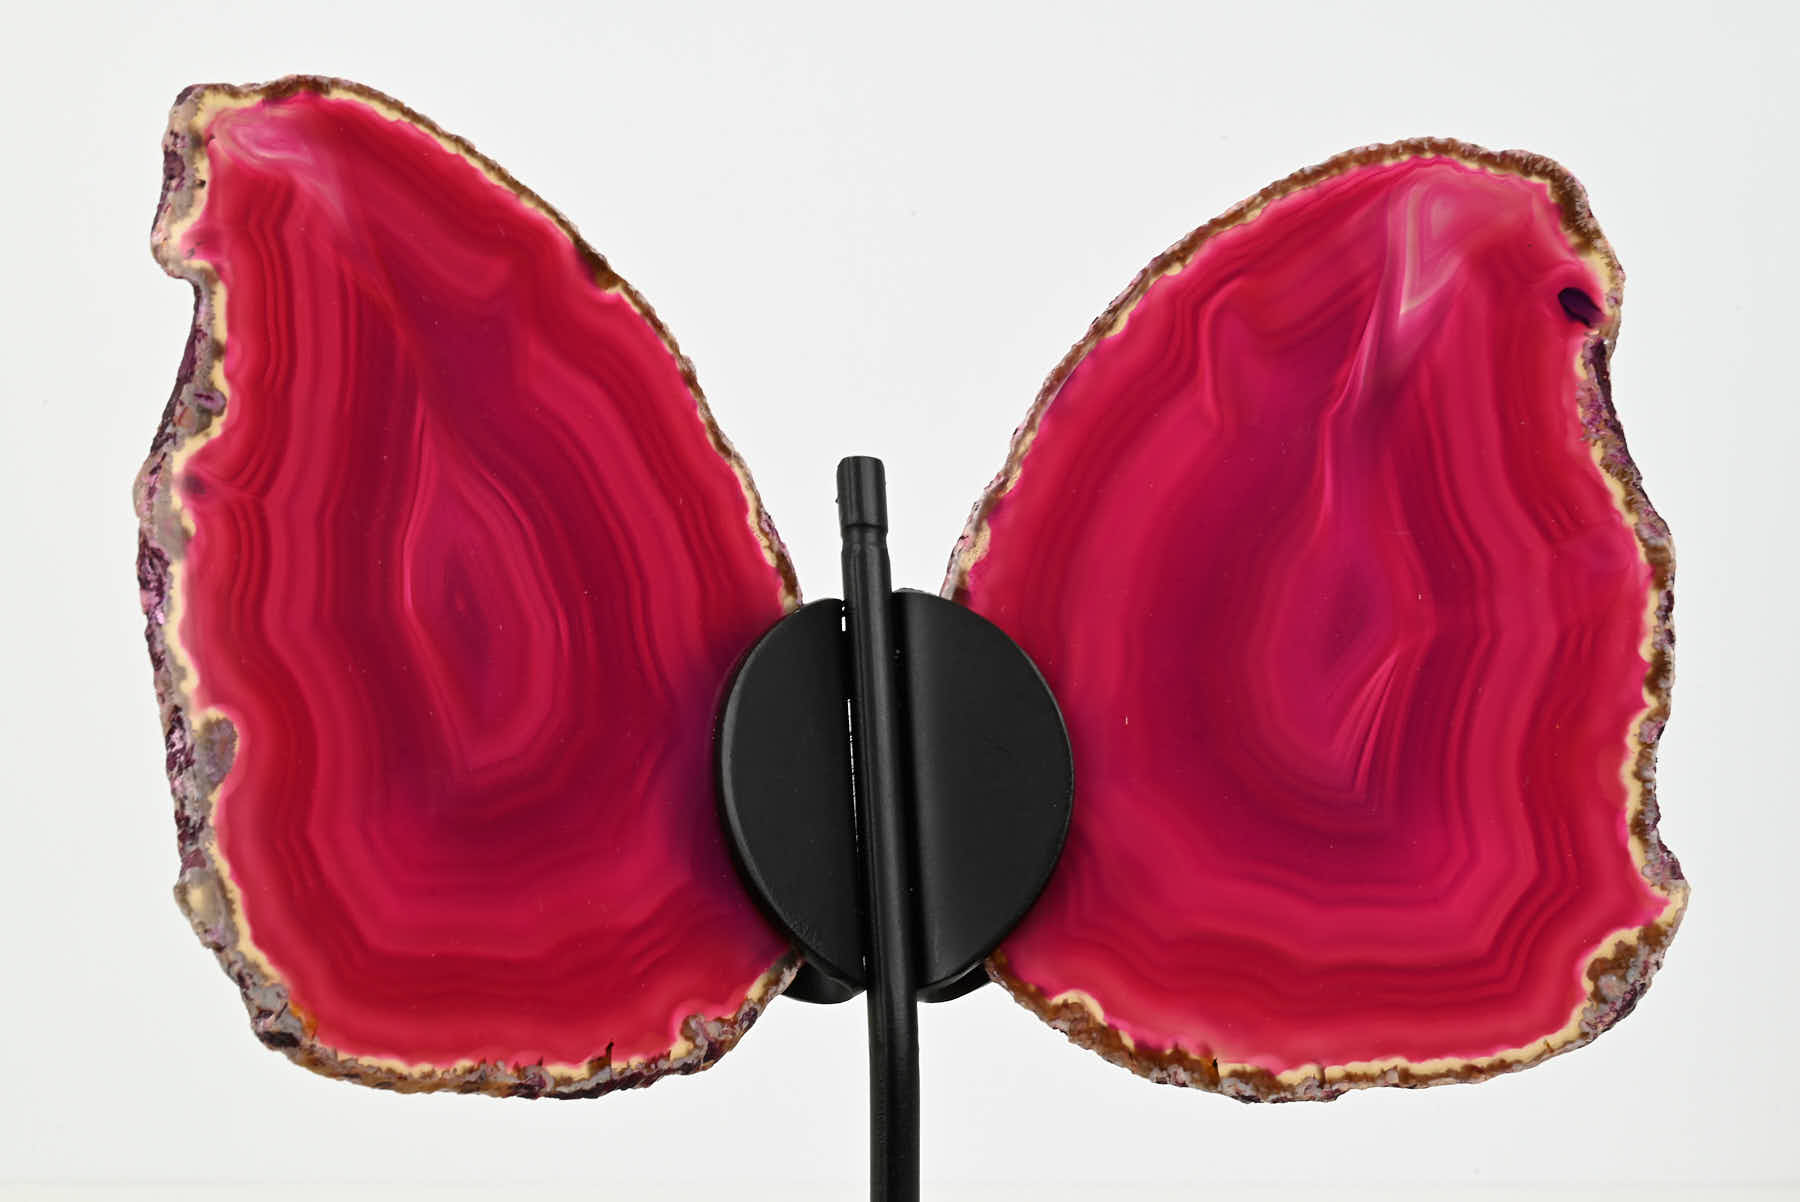 Pink Agate Butterfly on Stand - 0.50kg and 20cm Tall - #BUPINK-10013